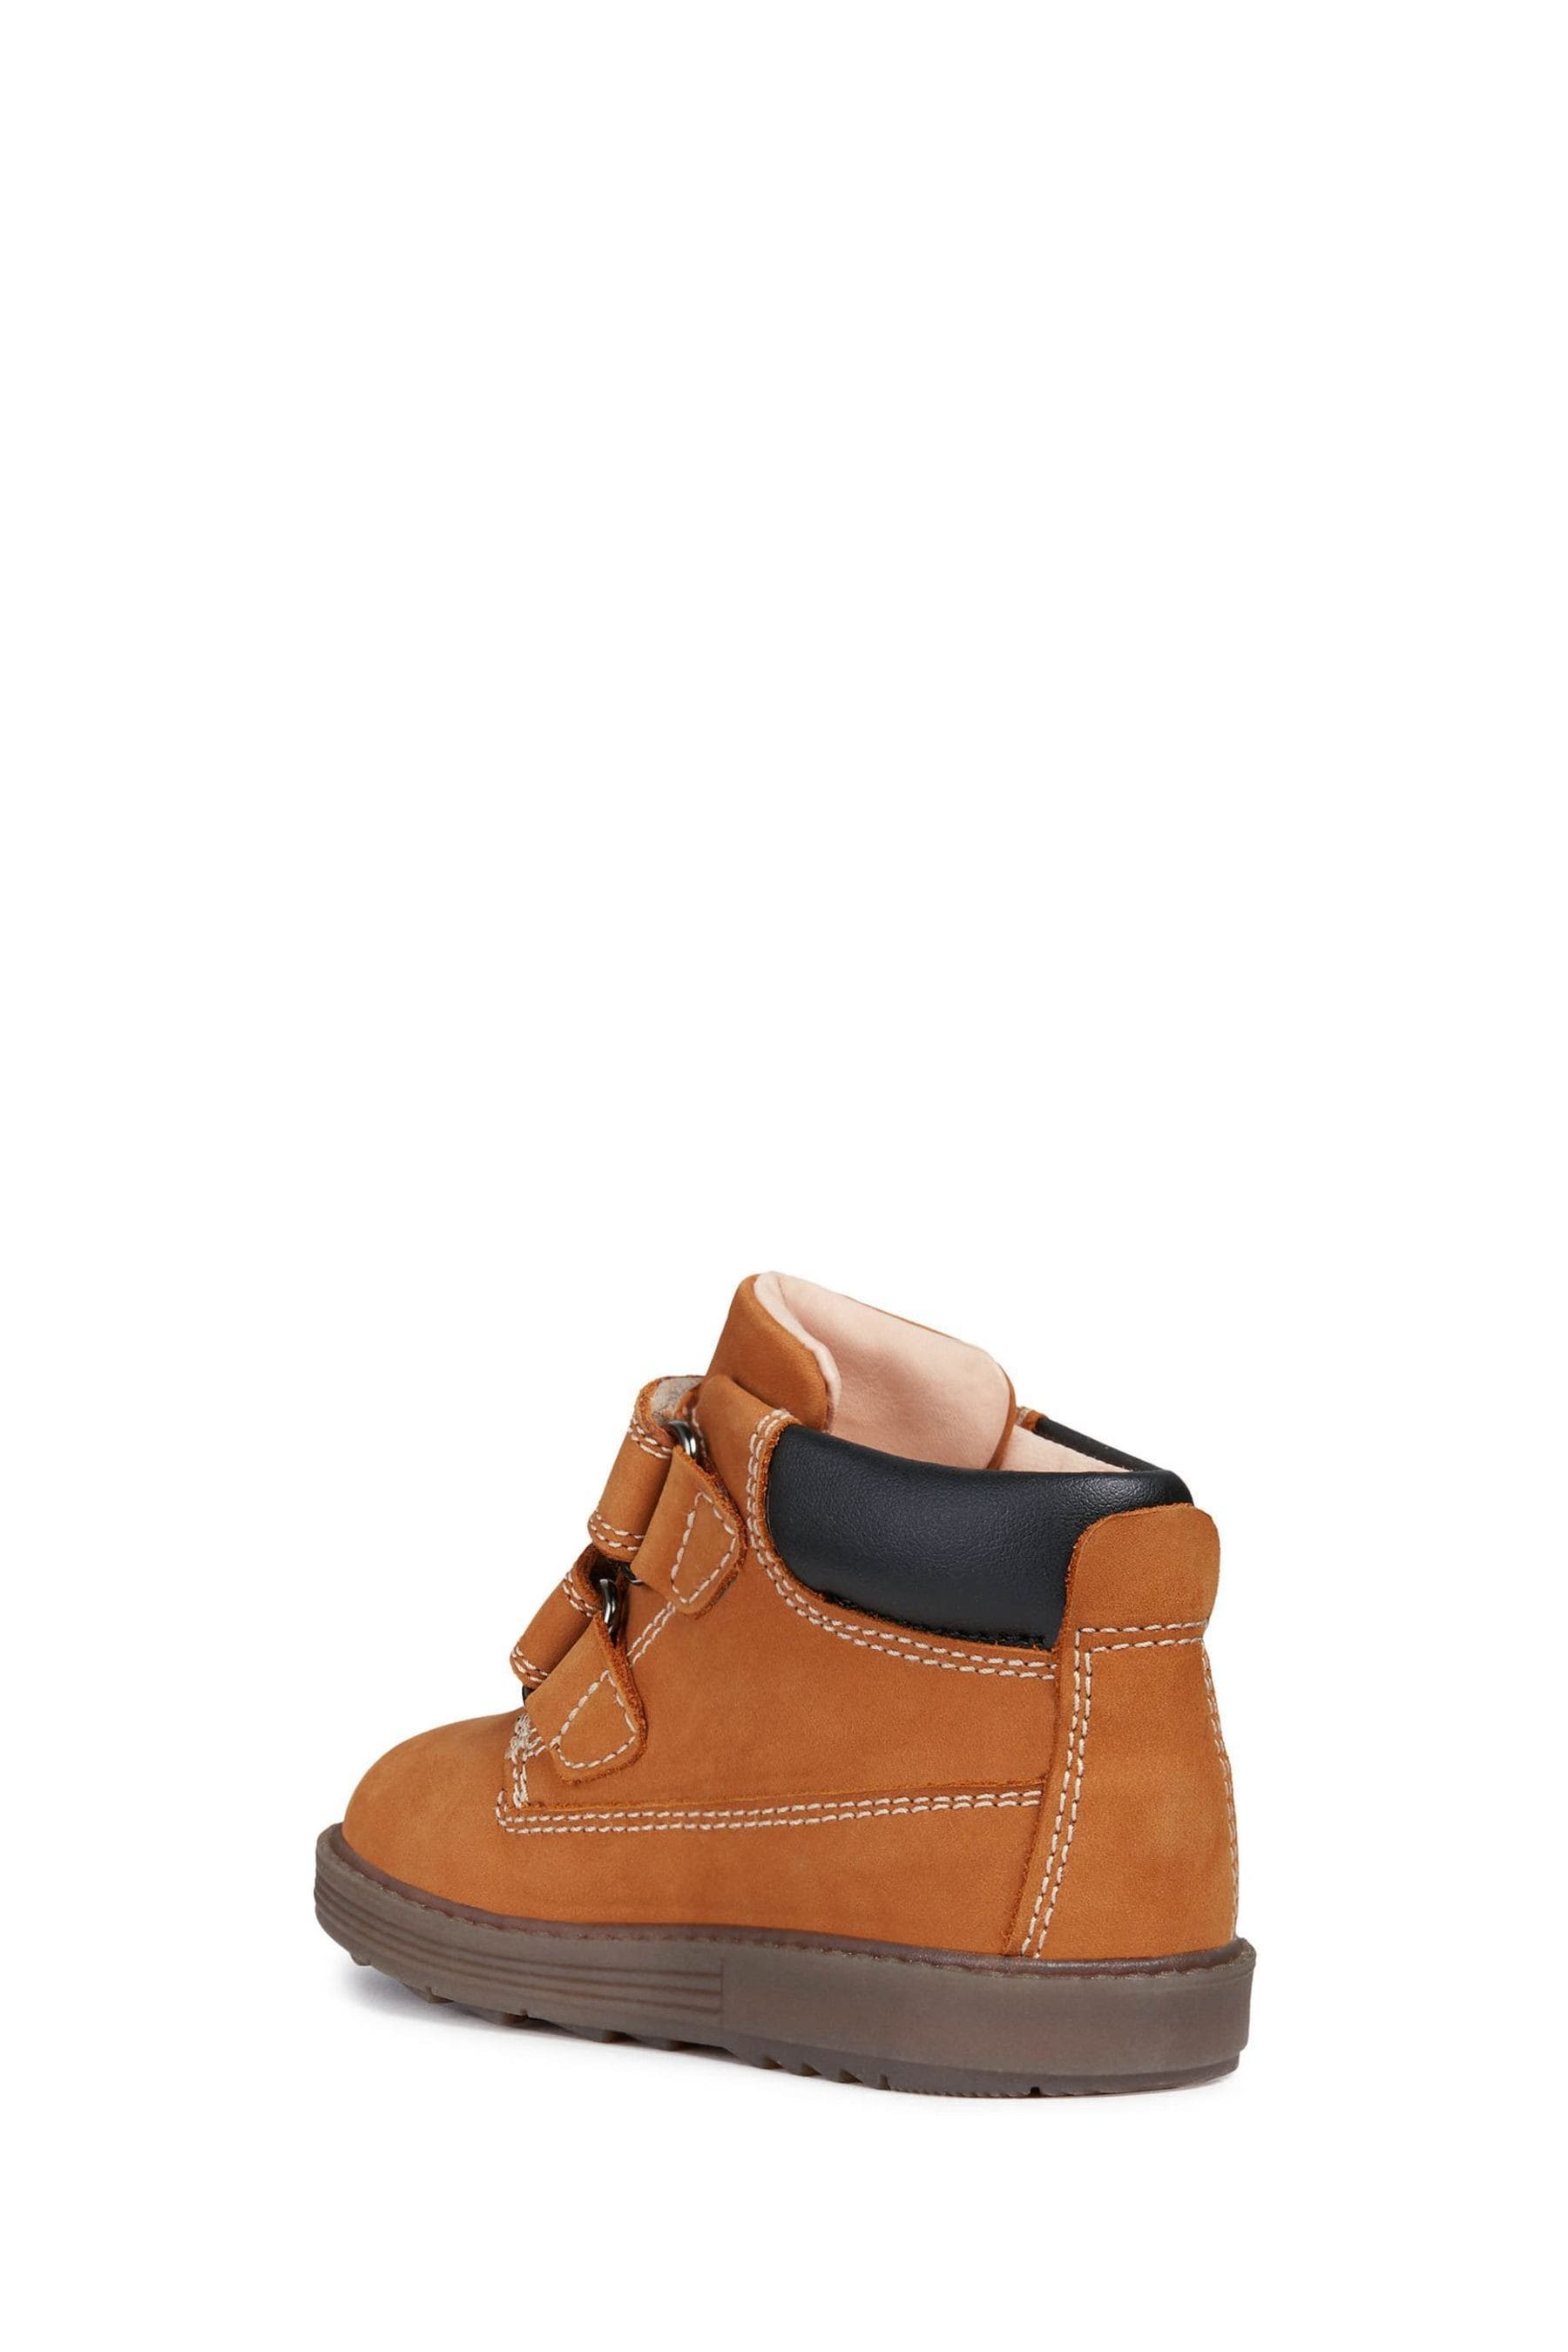 Buy Geox Baby Boy/Unisex Hynde Biscuit Boots from the Next UK online shop